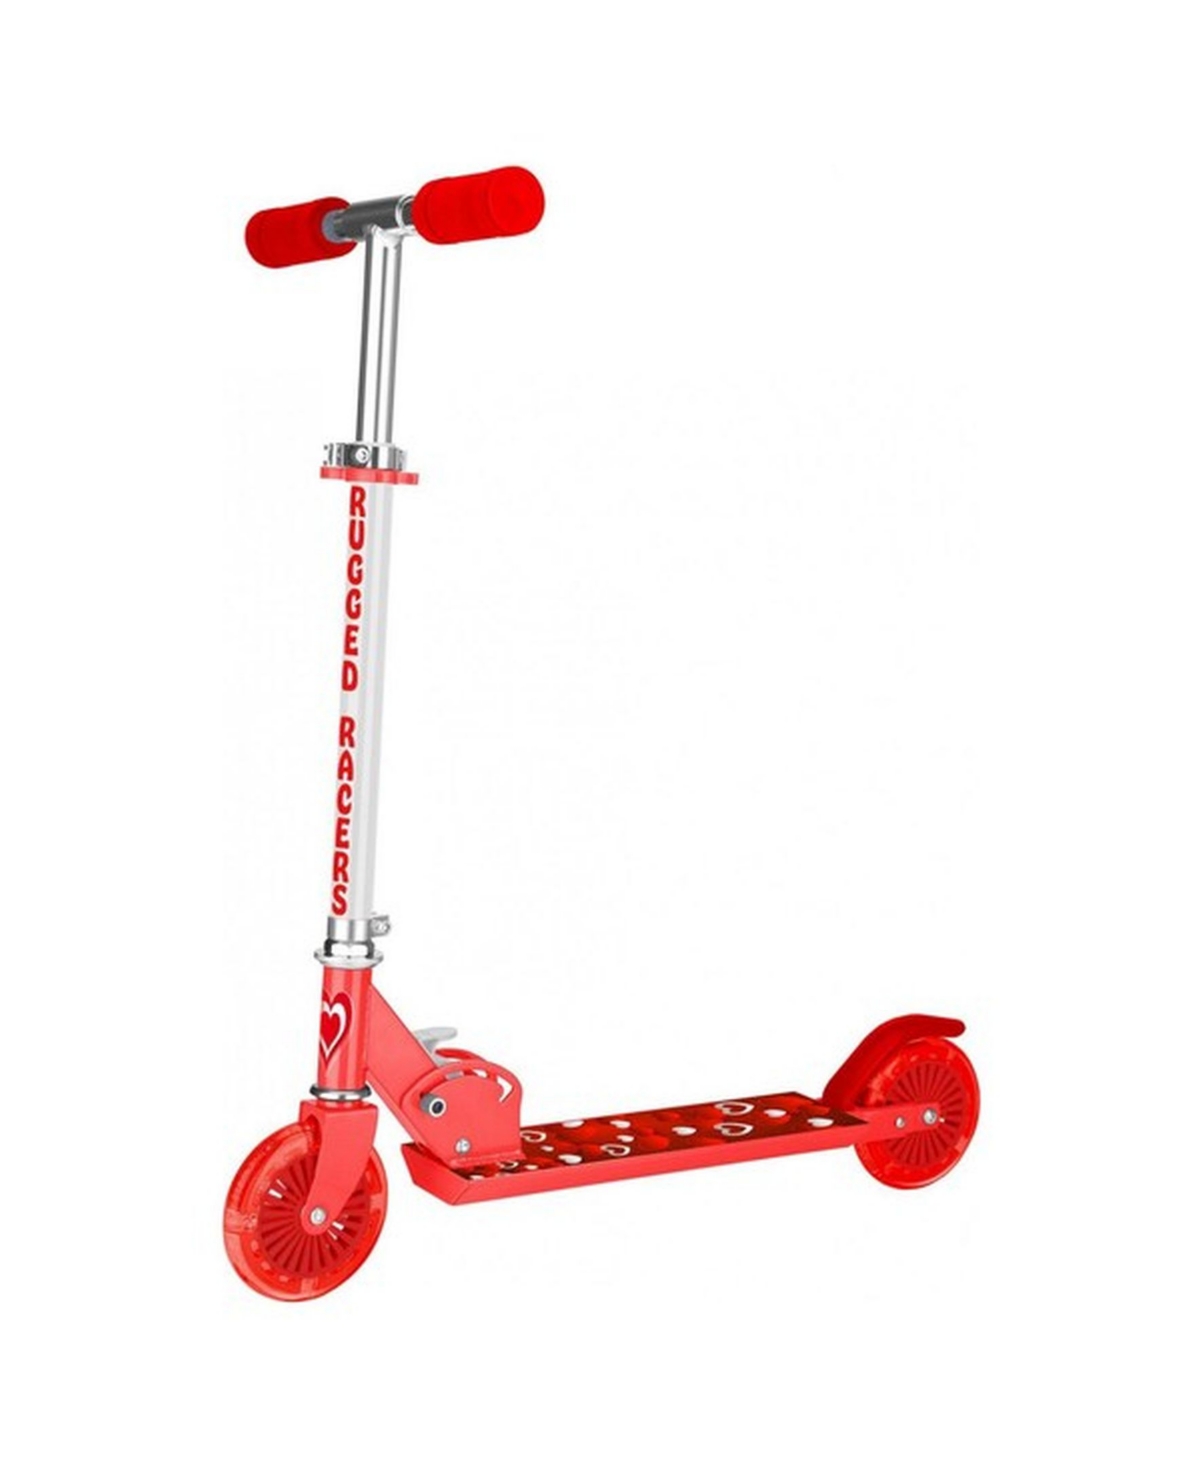 Rugged Racers 2 Wheel Scooter With Heart Print And Led Lights In Red